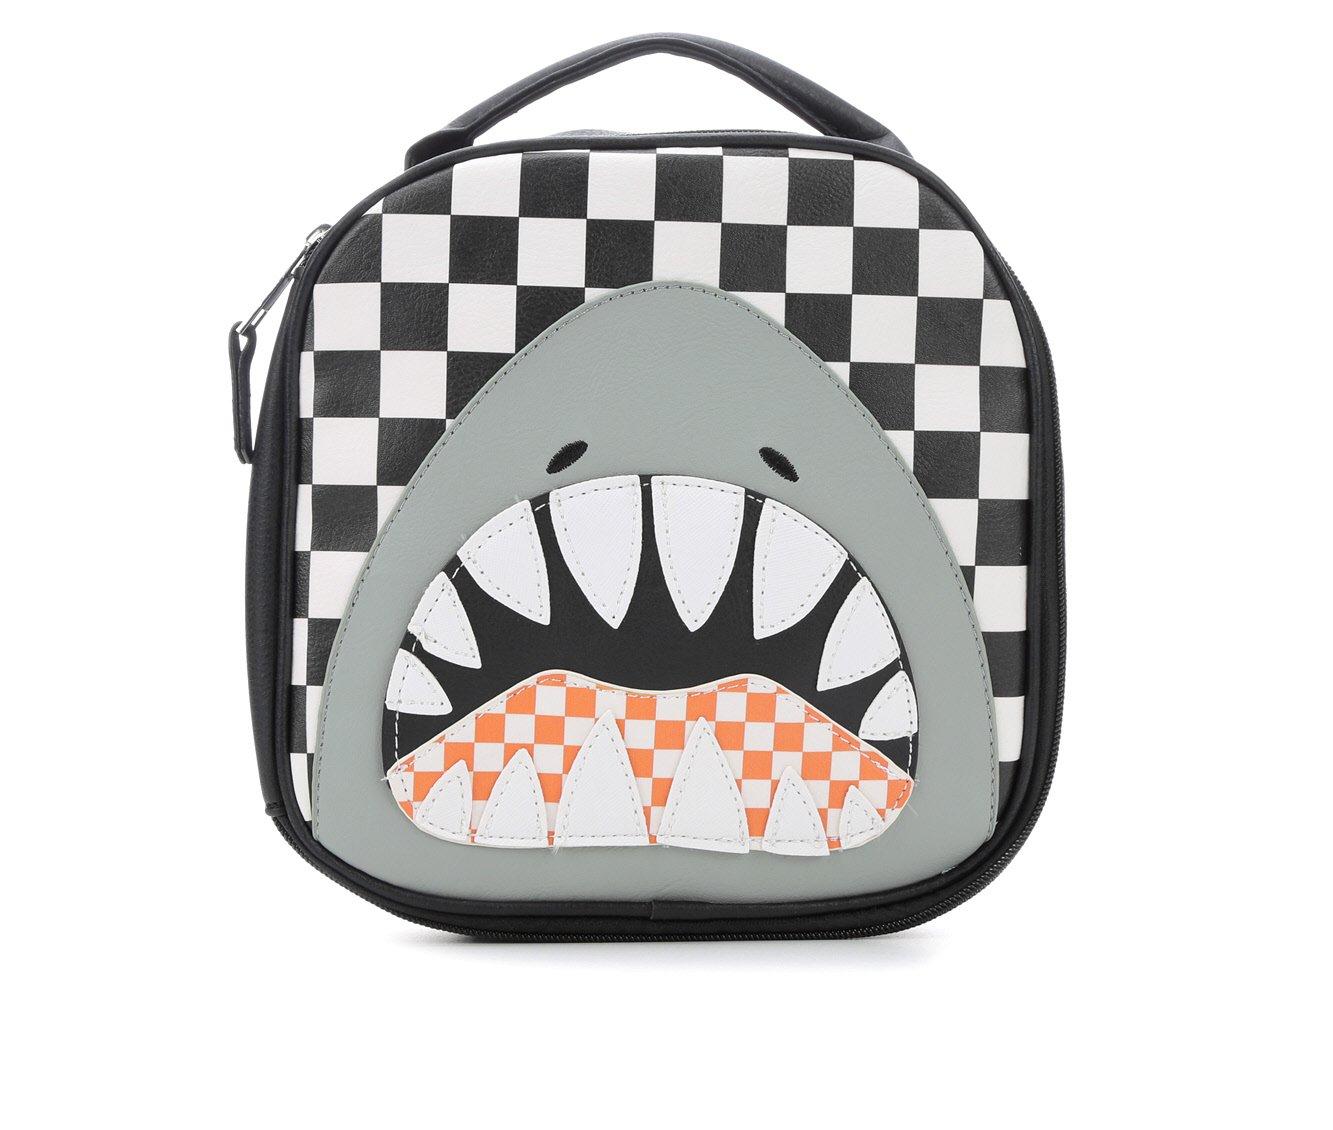 CLIP-TOP LUNCH BOX -- SMILEY SHARK – InchBug